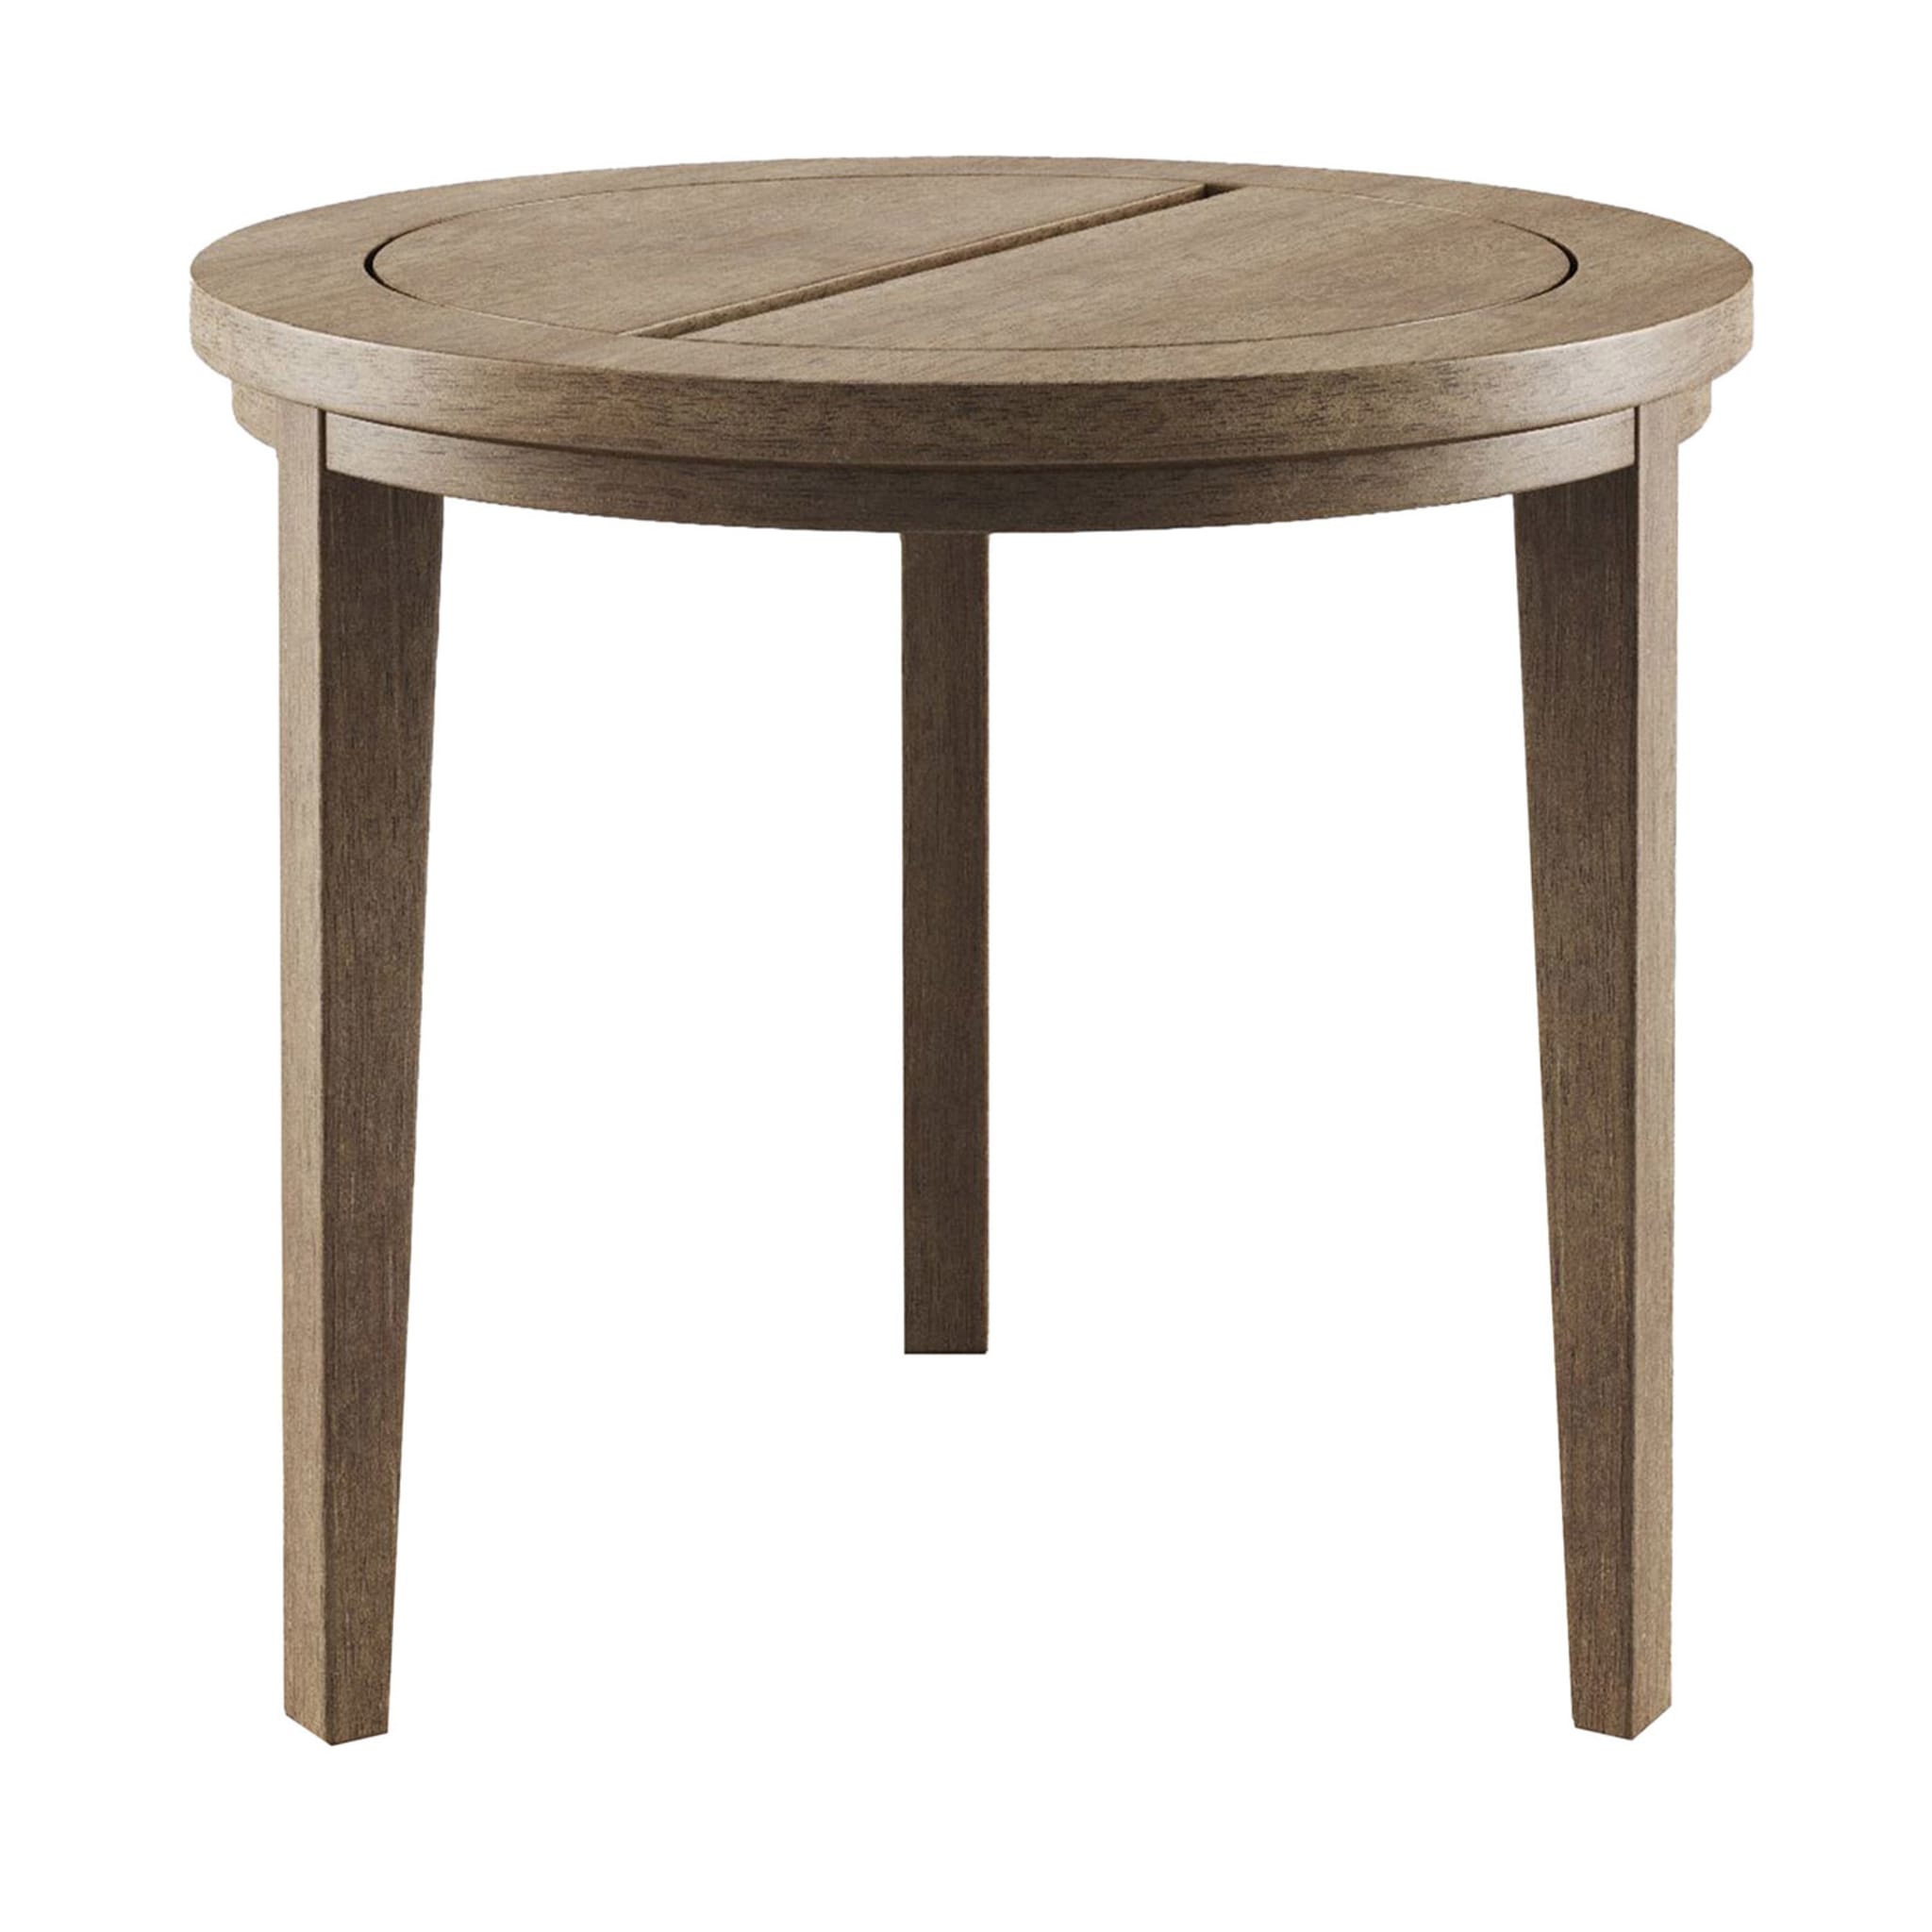 Feeling Round Coffee Table by Braid Design Lab - Main view